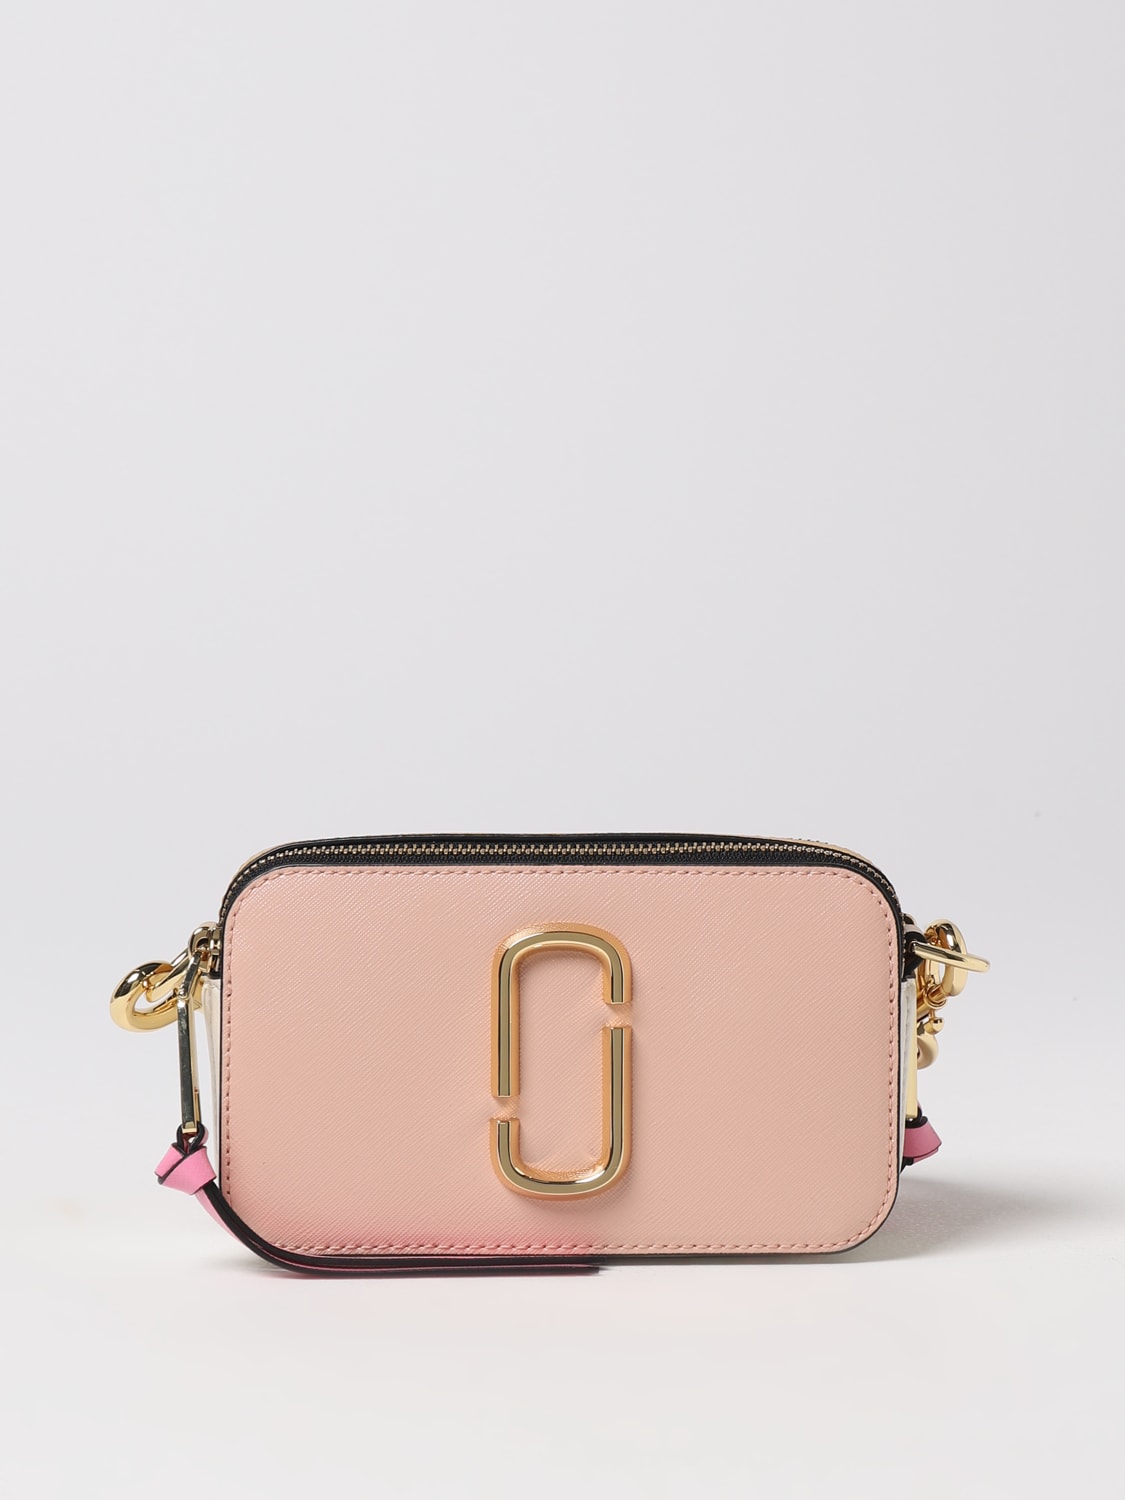 MARC JACOBS：ハンドバッグ レディース - ピンク | GIGLIO.COM